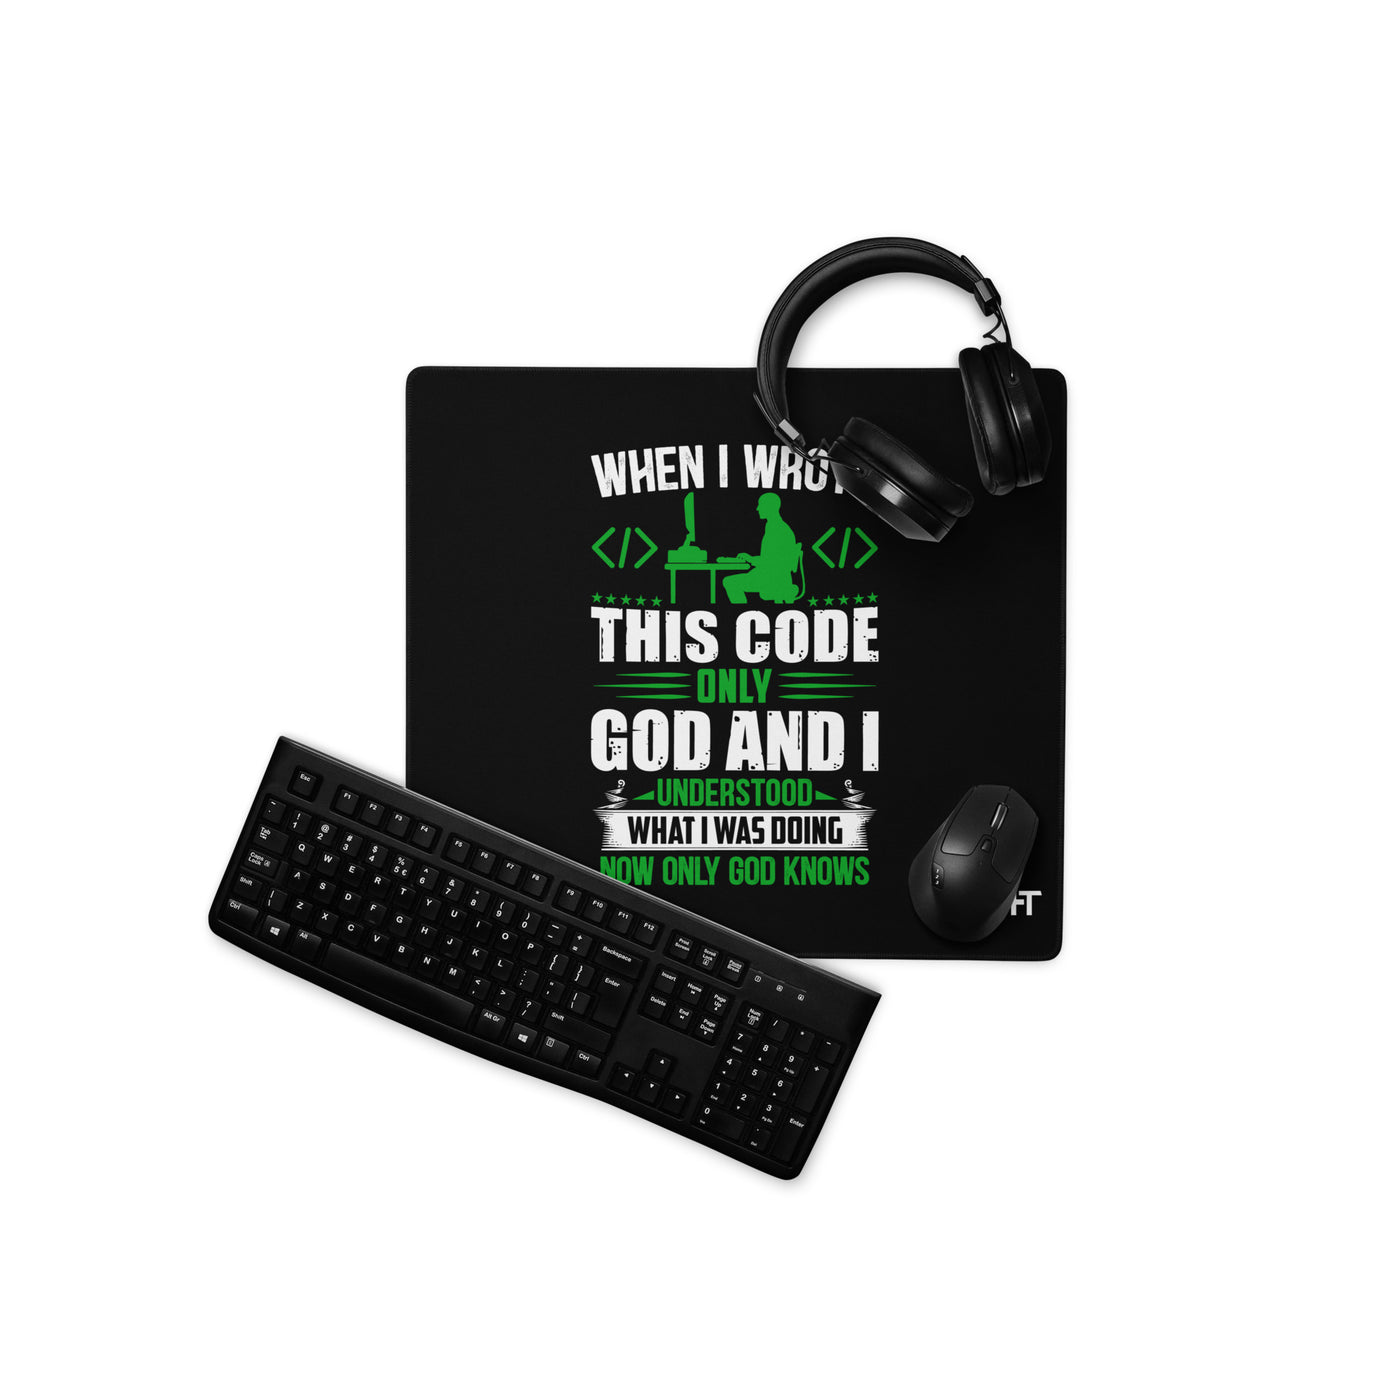 When I Wrote this code, only God and I Understood - Desk Mat